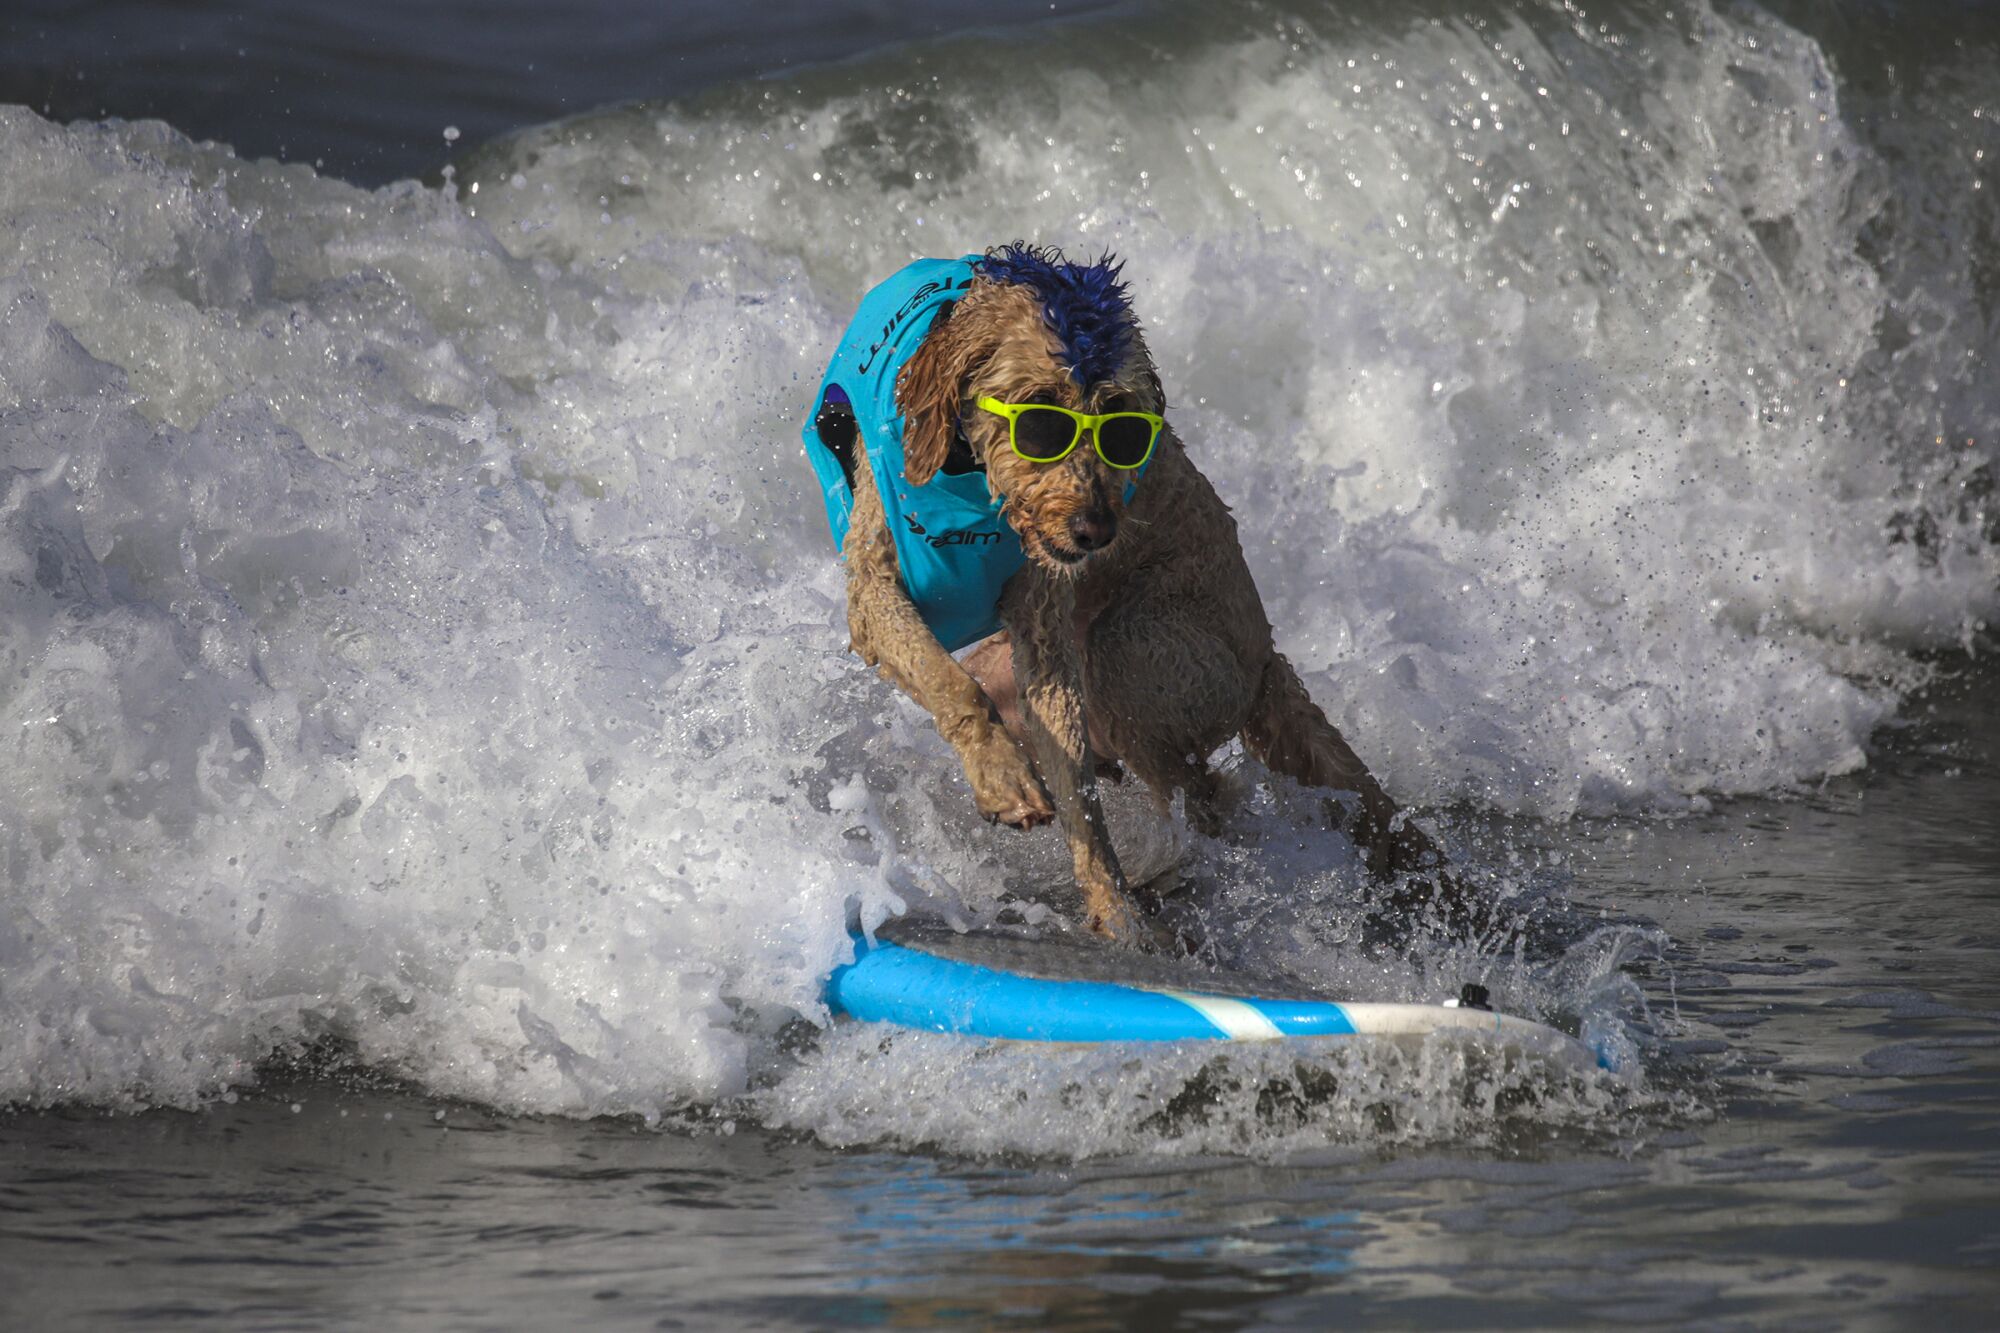  Derby, a 9-year-old Golden Doodle, rides a wave 